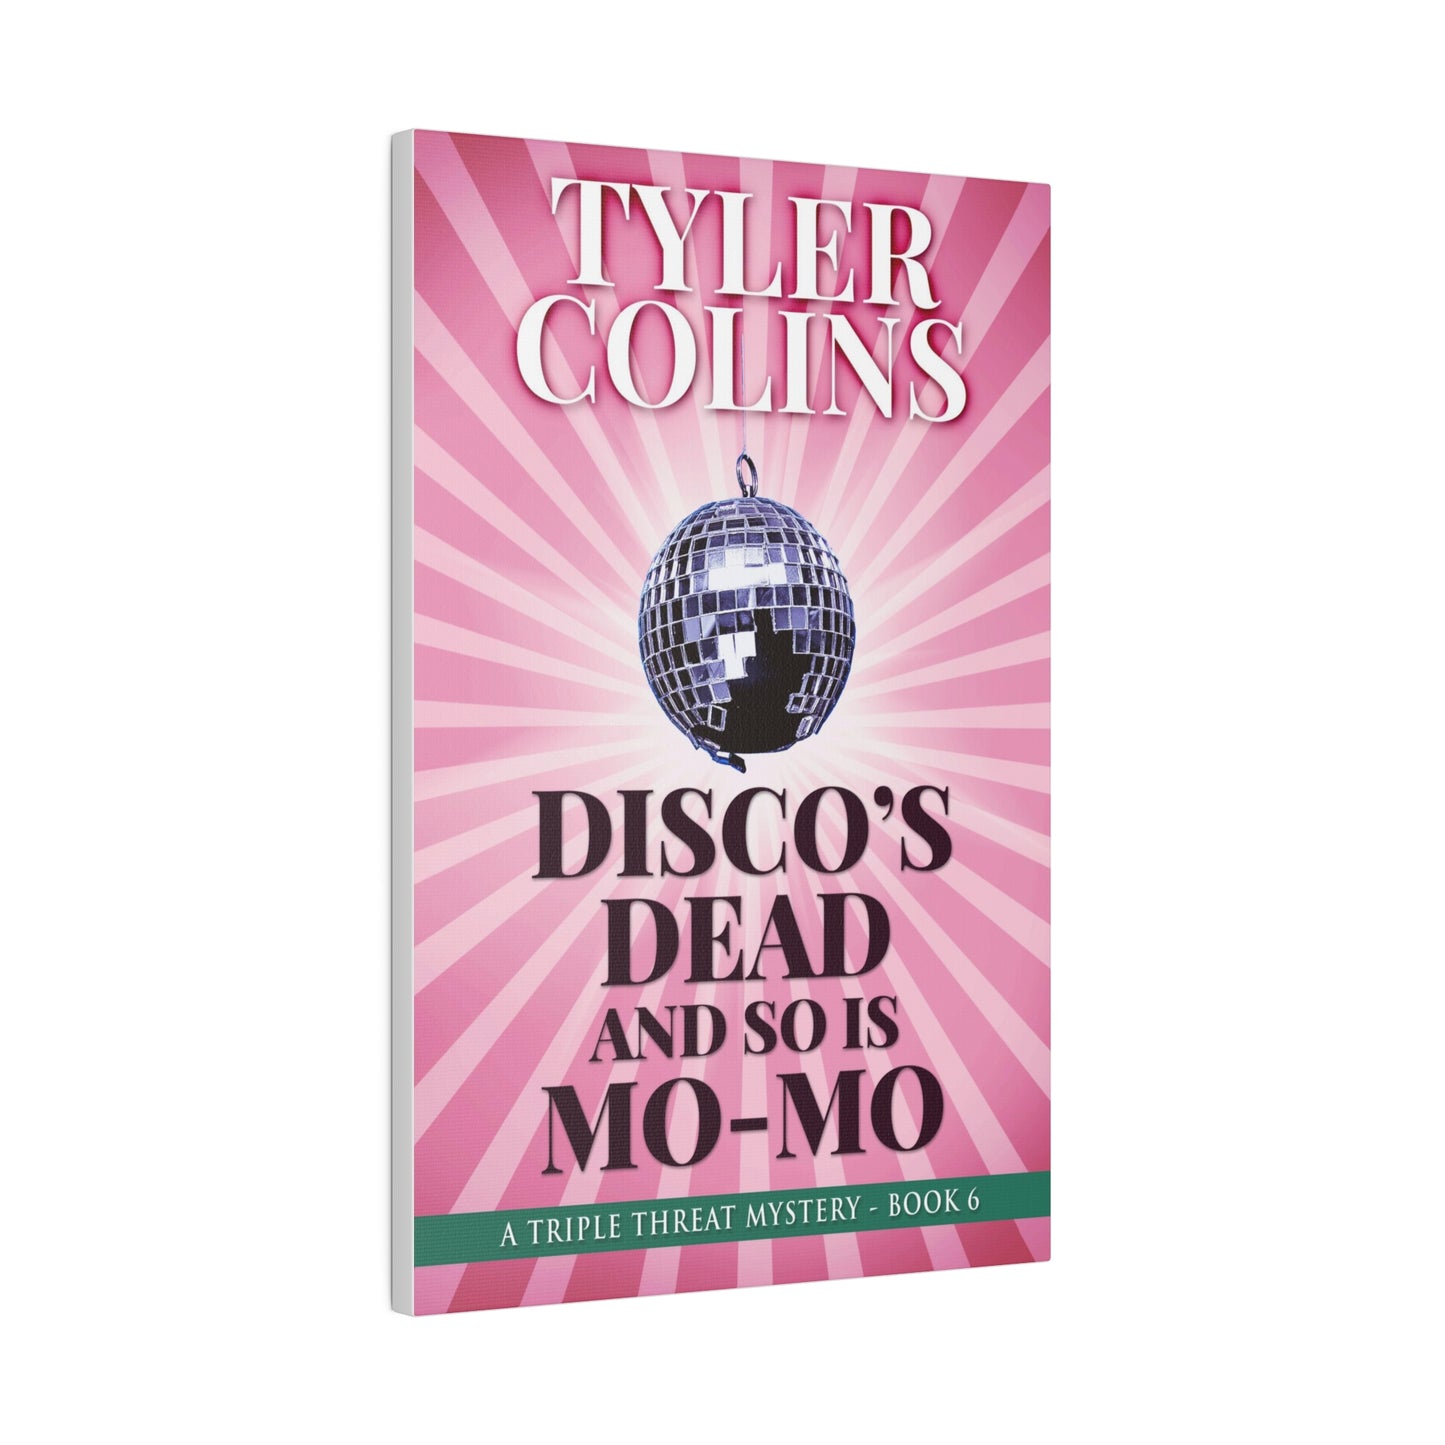 Disco's Dead and so is Mo-Mo - Canvas